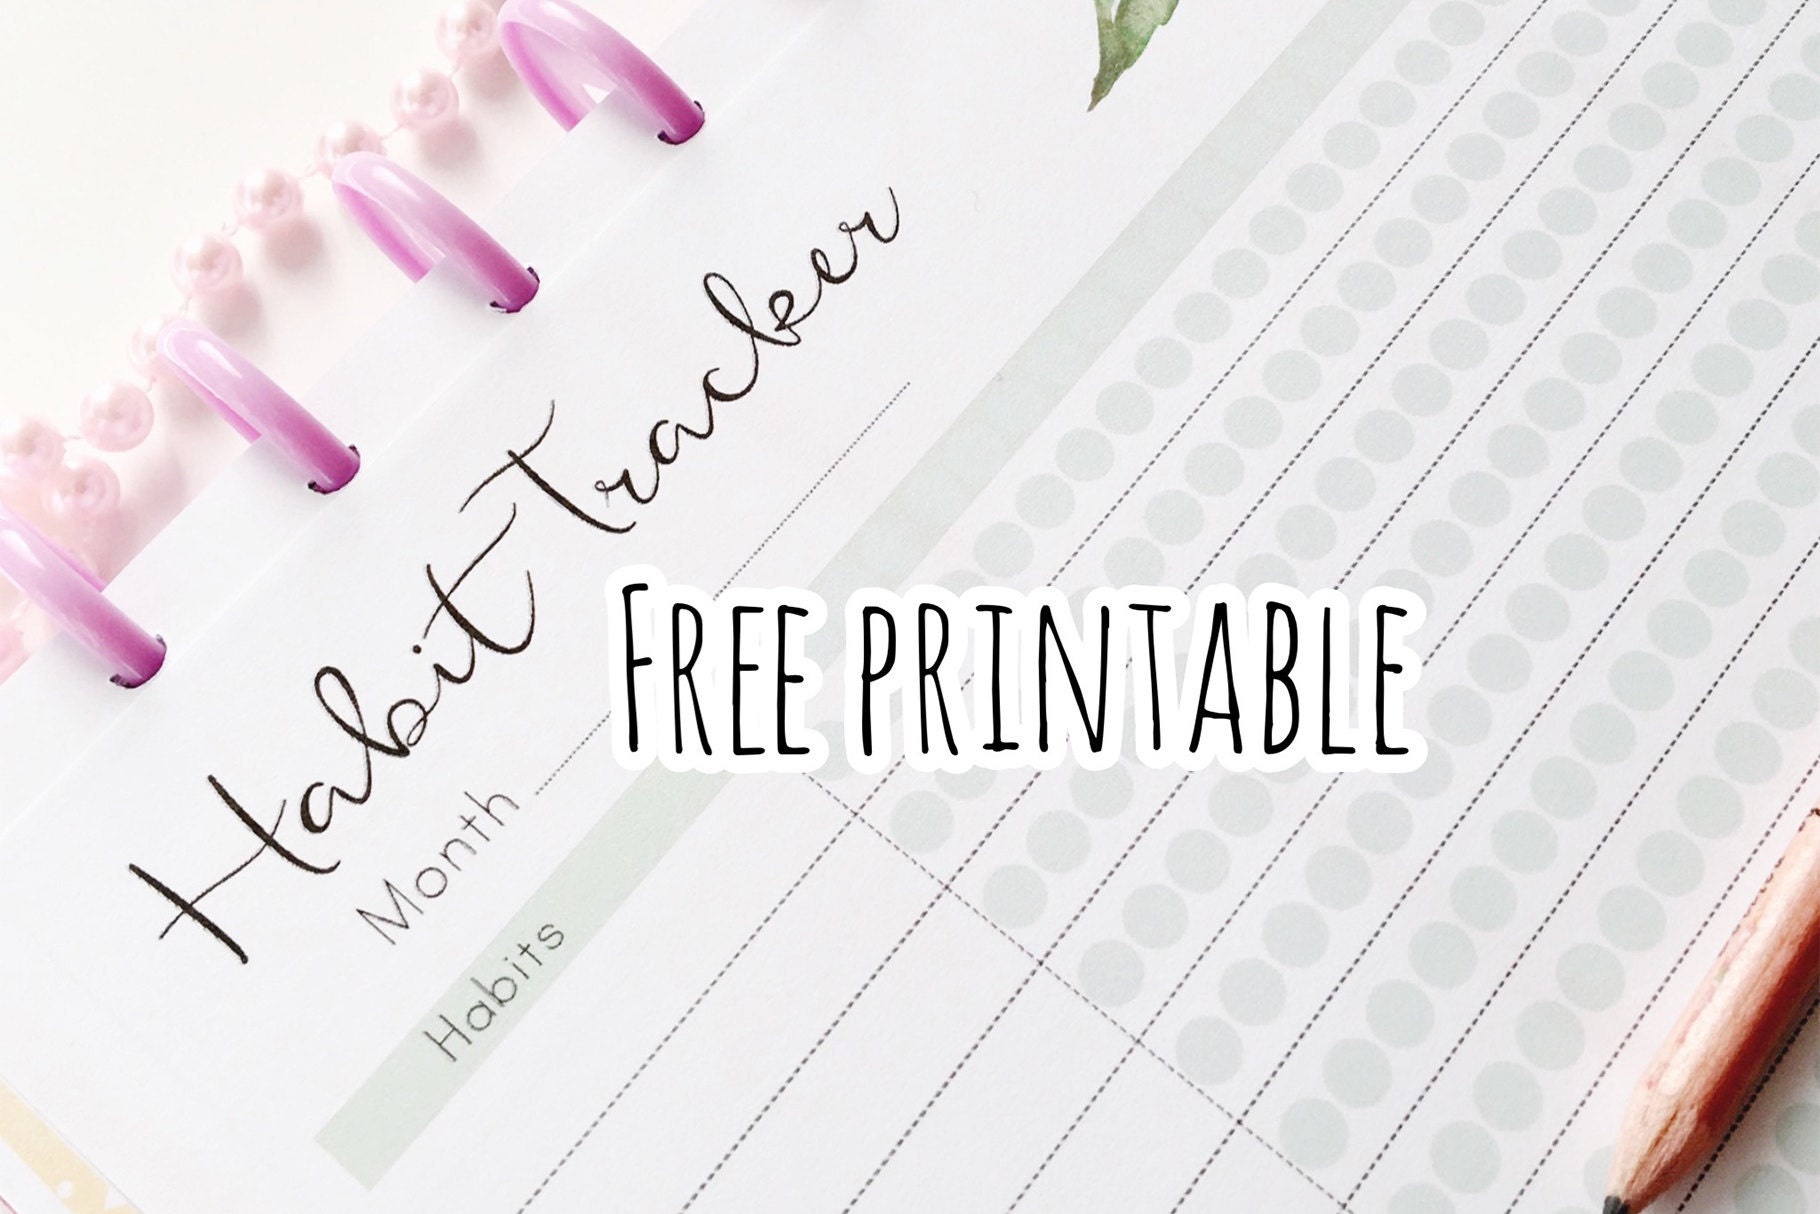 How to Print A5 Size Planner